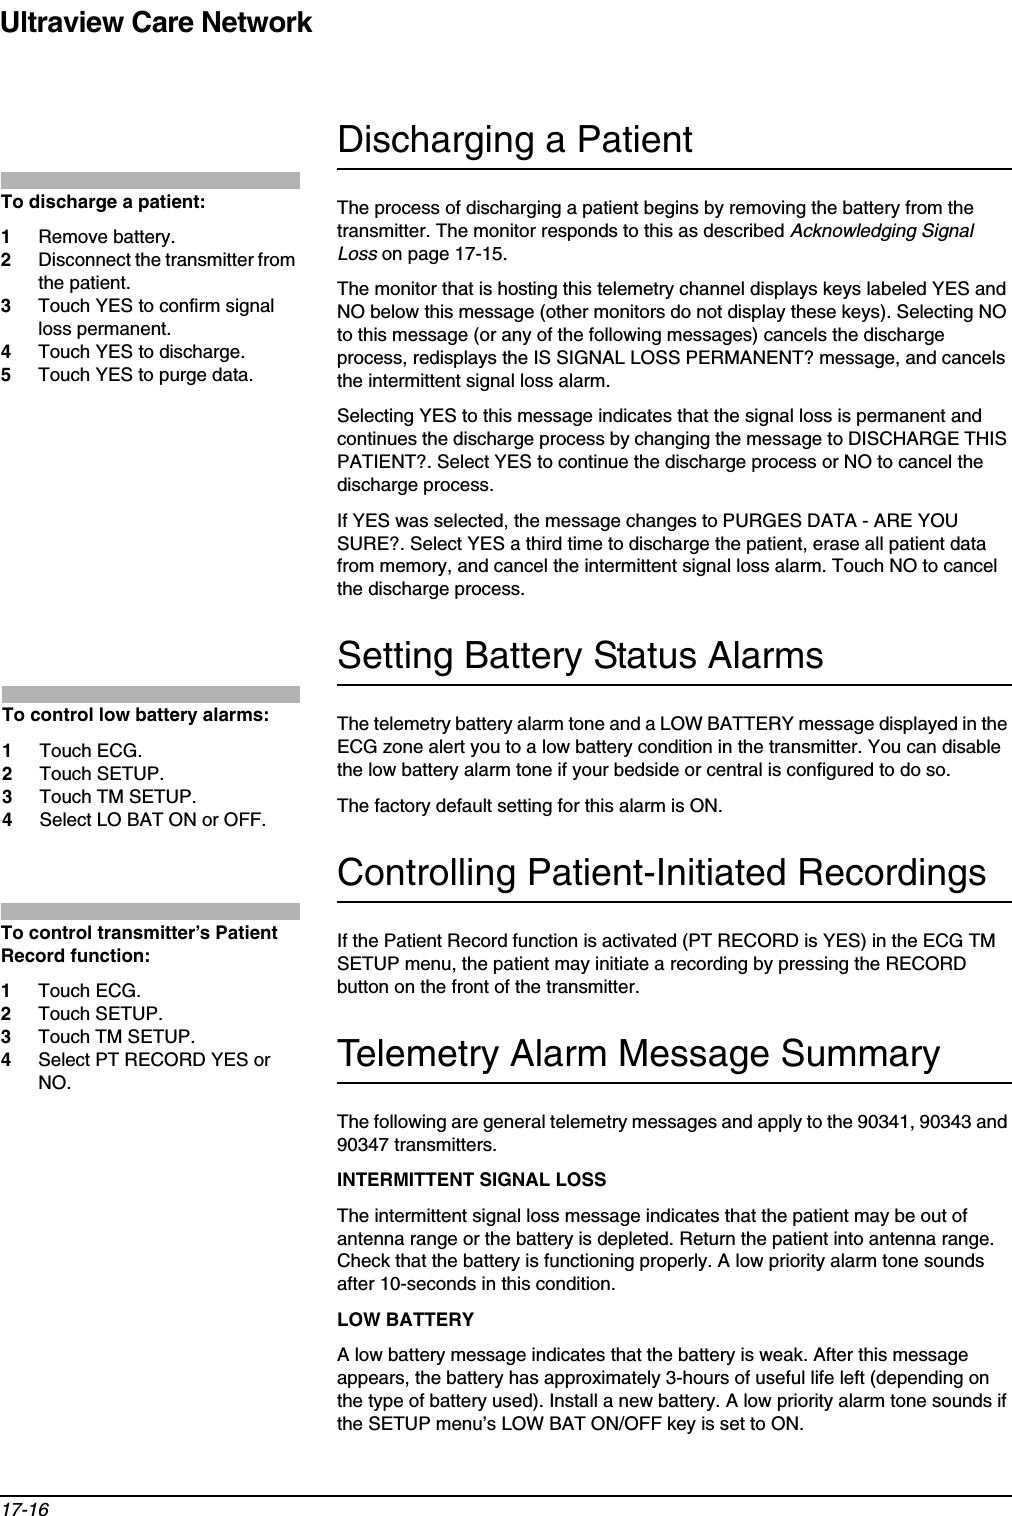 Ultraview Care Network17-16Discharging a PatientThe process of discharging a patient begins by removing the battery from the transmitter. The monitor responds to this as described Acknowledging Signal Loss on page 17-15.The monitor that is hosting this telemetry channel displays keys labeled YES and NO below this message (other monitors do not display these keys). Selecting NO to this message (or any of the following messages) cancels the discharge process, redisplays the IS SIGNAL LOSS PERMANENT? message, and cancels the intermittent signal loss alarm.Selecting YES to this message indicates that the signal loss is permanent and continues the discharge process by changing the message to DISCHARGE THIS PATIENT?. Select YES to continue the discharge process or NO to cancel the discharge process.If YES was selected, the message changes to PURGES DATA - ARE YOU SURE?. Select YES a third time to discharge the patient, erase all patient data from memory, and cancel the intermittent signal loss alarm. Touch NO to cancel the discharge process.Setting Battery Status AlarmsThe telemetry battery alarm tone and a LOW BATTERY message displayed in the ECG zone alert you to a low battery condition in the transmitter. You can disable the low battery alarm tone if your bedside or central is configured to do so.The factory default setting for this alarm is ON. Controlling Patient-Initiated RecordingsIf the Patient Record function is activated (PT RECORD is YES) in the ECG TM SETUP menu, the patient may initiate a recording by pressing the RECORD button on the front of the transmitter. Telemetry Alarm Message SummaryThe following are general telemetry messages and apply to the 90341, 90343 and 90347 transmitters.INTERMITTENT SIGNAL LOSSThe intermittent signal loss message indicates that the patient may be out of antenna range or the battery is depleted. Return the patient into antenna range. Check that the battery is functioning properly. A low priority alarm tone sounds after 10-seconds in this condition. LOW BATTERYA low battery message indicates that the battery is weak. After this message appears, the battery has approximately 3-hours of useful life left (depending on the type of battery used). Install a new battery. A low priority alarm tone sounds if the SETUP menu’s LOW BAT ON/OFF key is set to ON. To discharge a patient: 1Remove battery.2Disconnect the transmitter from the patient.3Touch YES to confirm signal loss permanent. 4Touch YES to discharge.5Touch YES to purge data.To control low battery alarms: 1Touch ECG. 2Touch SETUP. 3Touch TM SETUP.4Select LO BAT ON or OFF.To control transmitter’s Patient Record function:1Touch ECG.2Touch SETUP. 3Touch TM SETUP.4Select PT RECORD YES or NO.